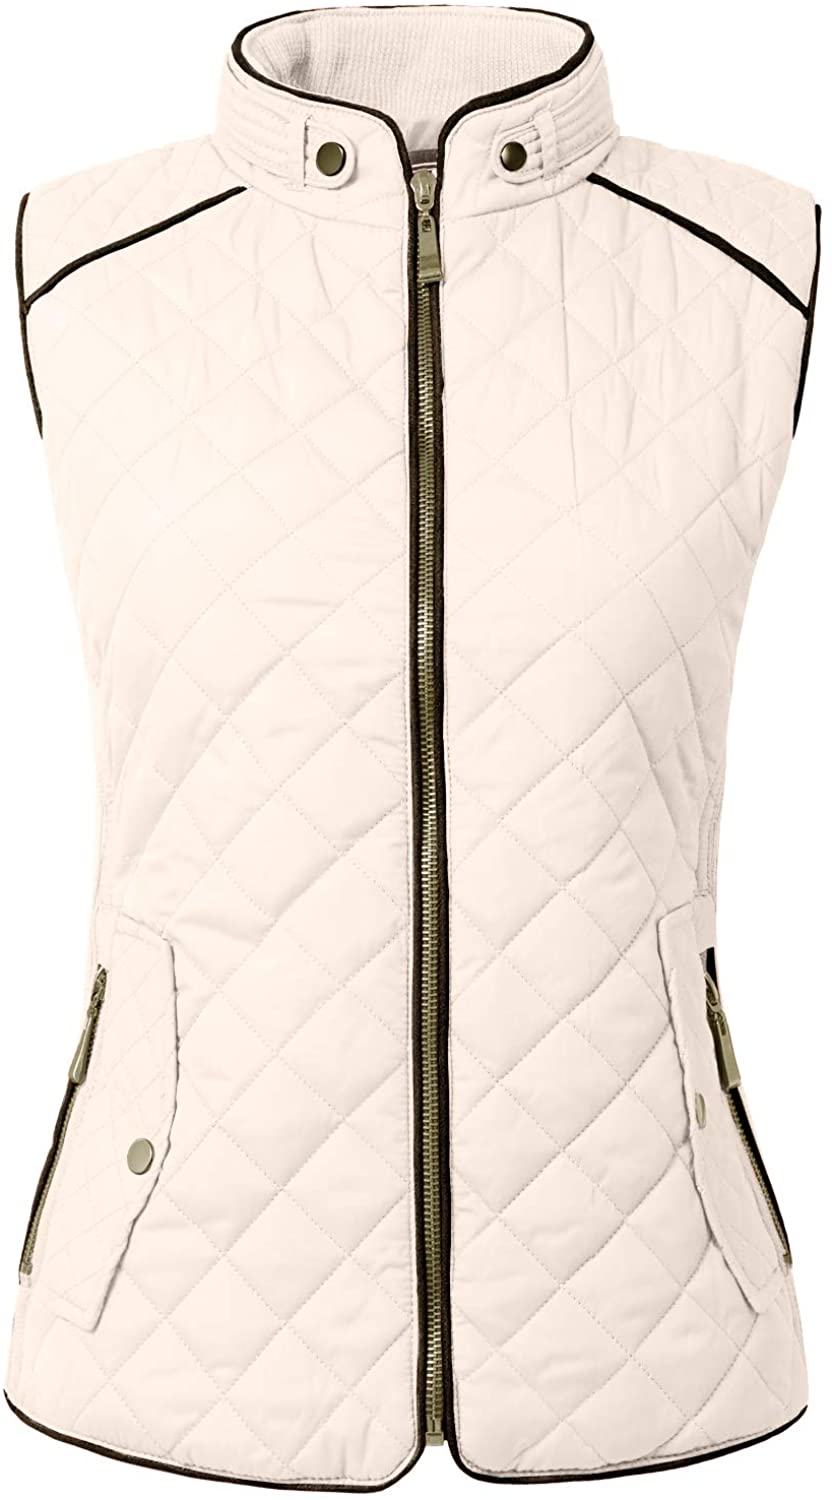 NE PEOPLE Womens Lightweight Quilted Padding Zip Up Vest Gilet S-3XL